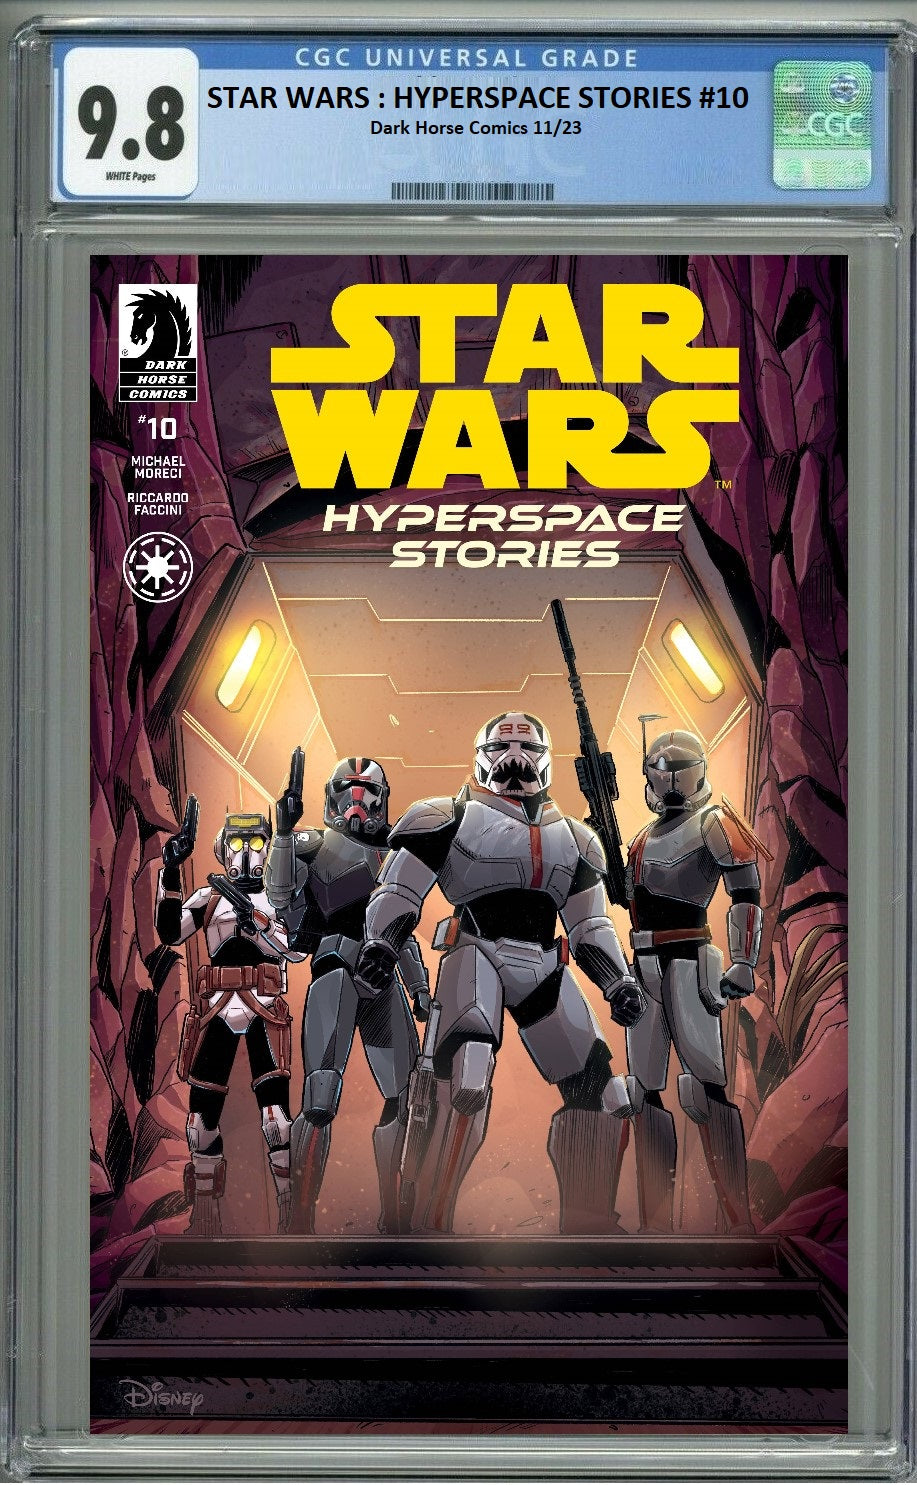 STAR WARS HYPERSPACE STORIES #10 (OF 12) CVR A FOWLER - 1ST APP OF BAD BATCH IN COMICS CGC 9.8 PREORDER